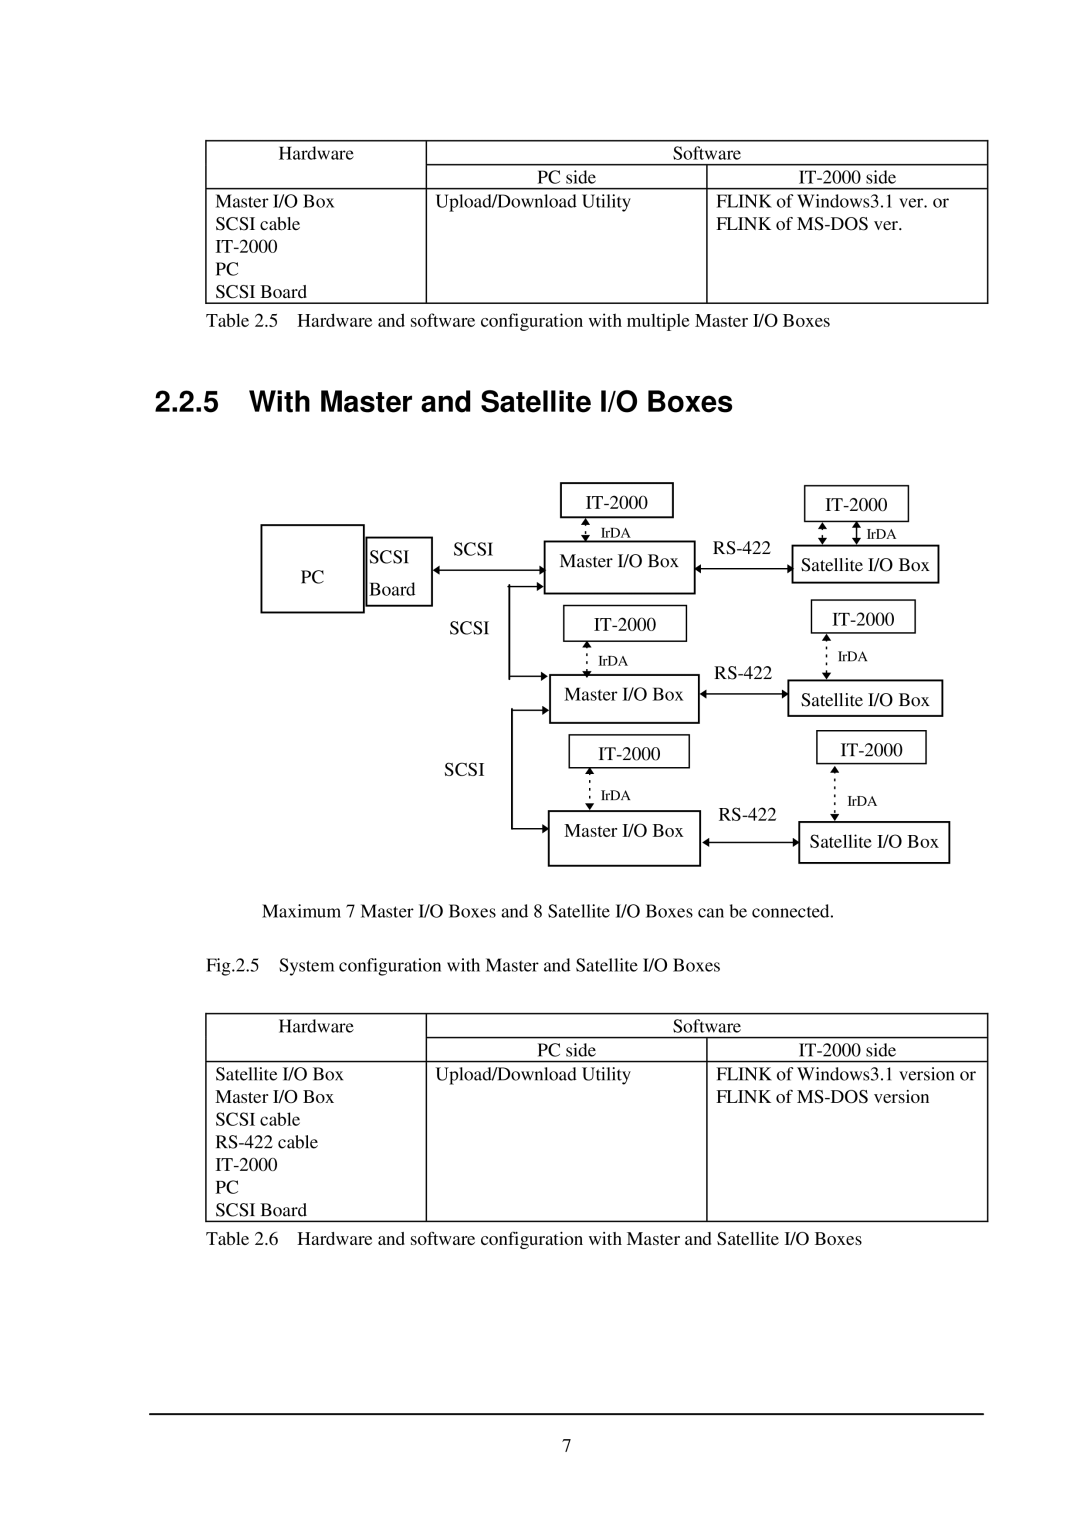 Casio IT-2000 installation manual With Master and Satellite I/O Boxes 